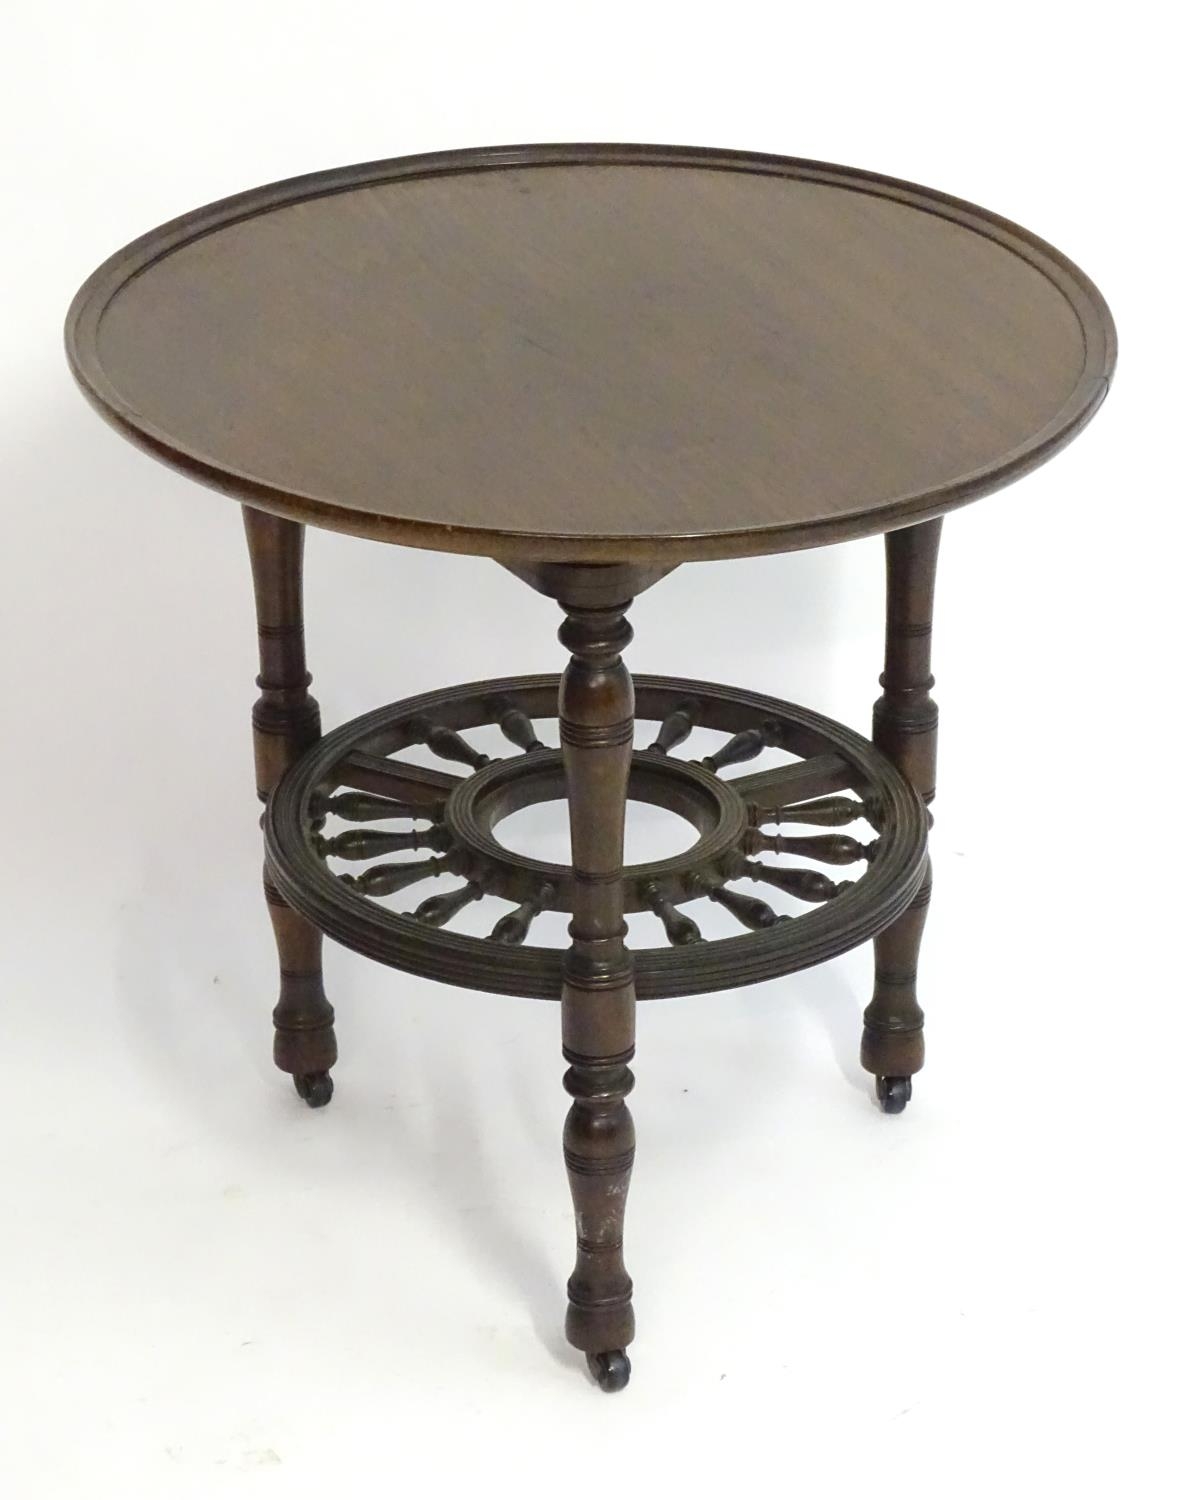 A late 19thC mahogany occasional table with a lazy Susan top and rounded under tier with turned